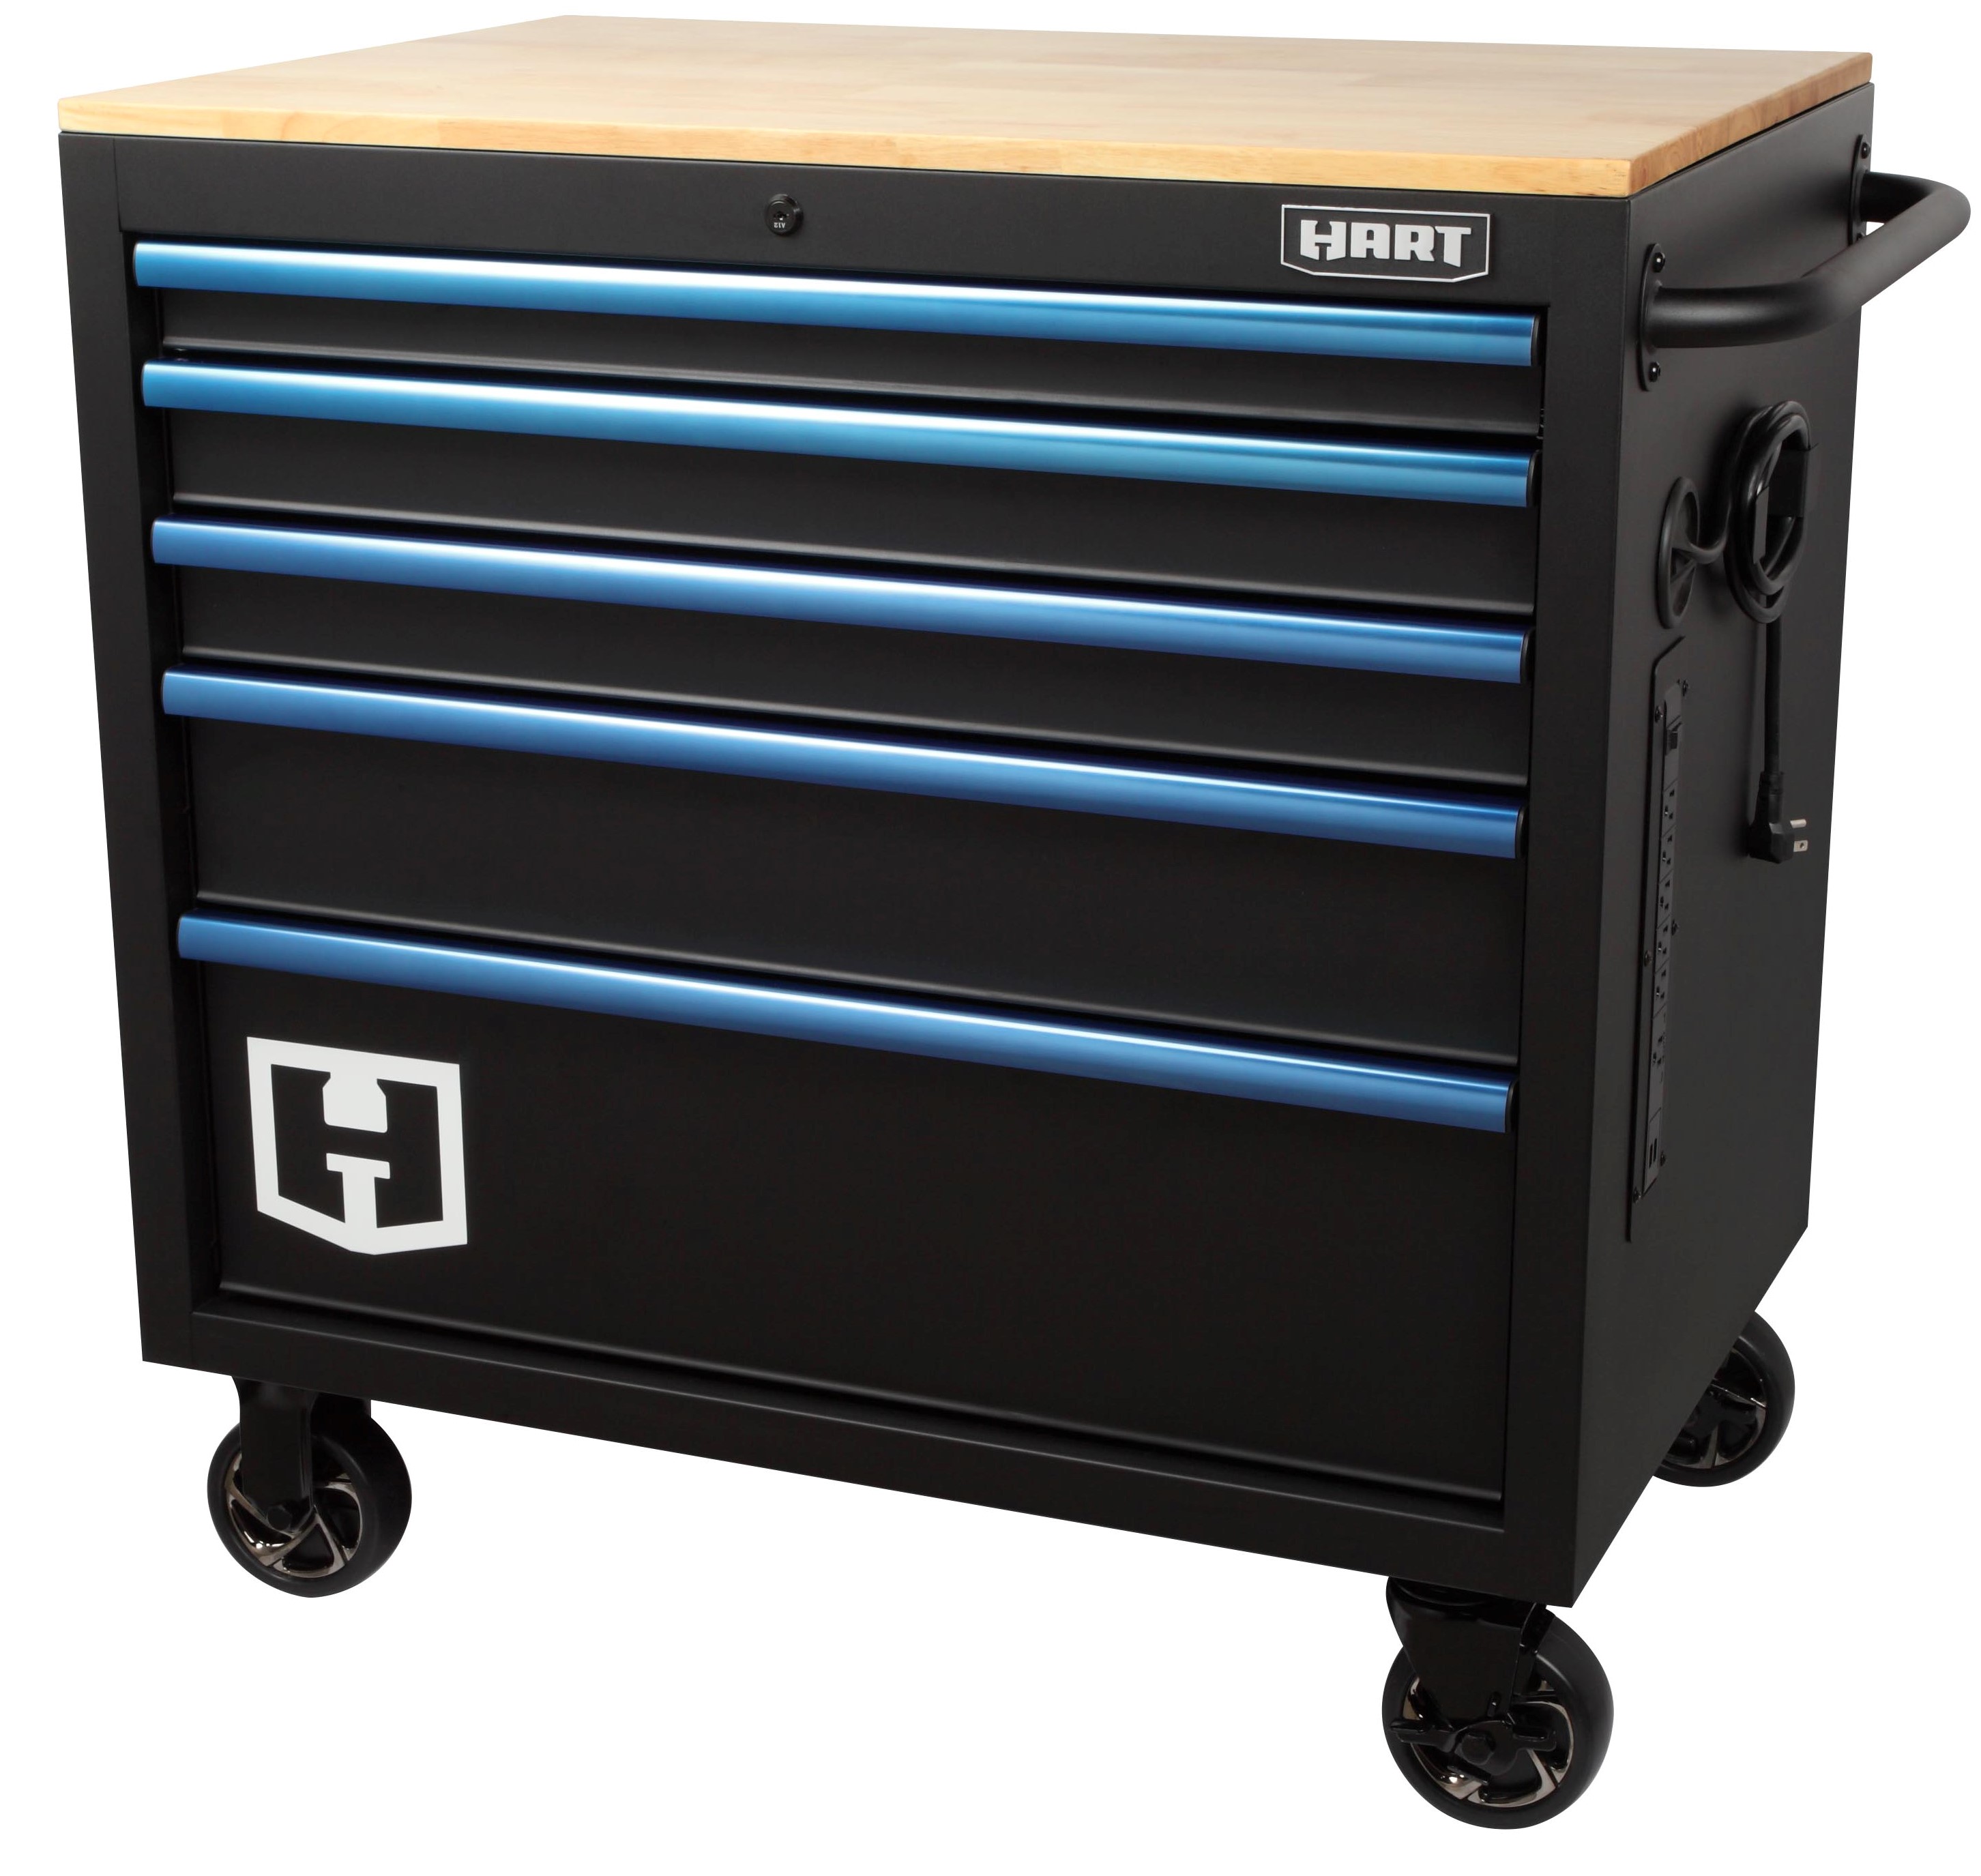 Hart 36-In W x 24-In D 5-Drawer Mobile Tool Chest Workbench W/ Wood Top, Garage Use - image 1 of 7